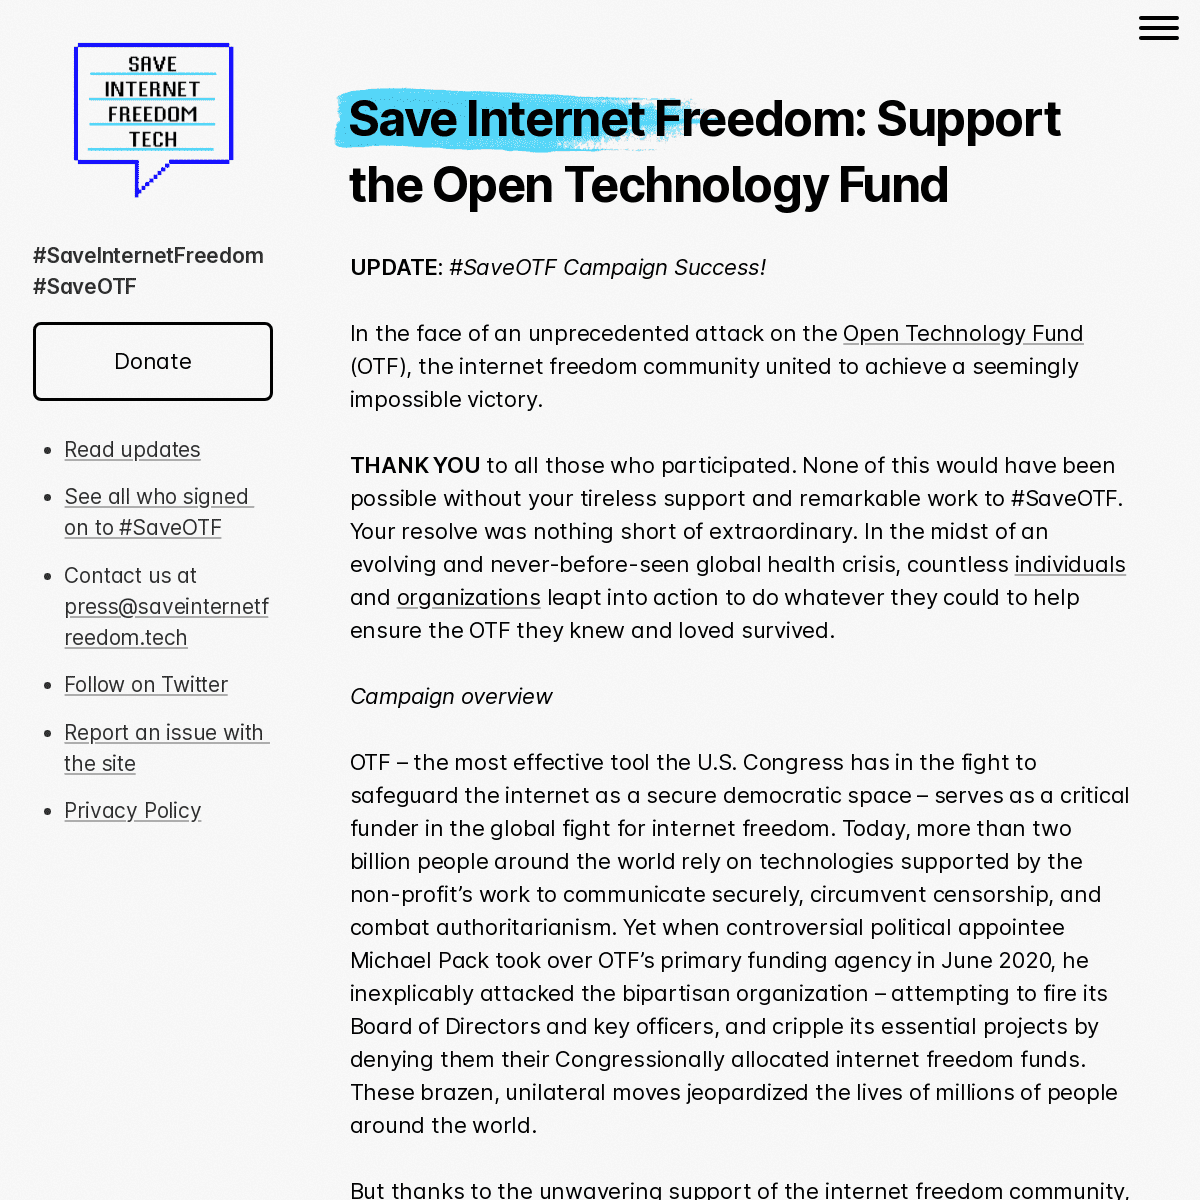 A complete backup of https://saveinternetfreedom.tech